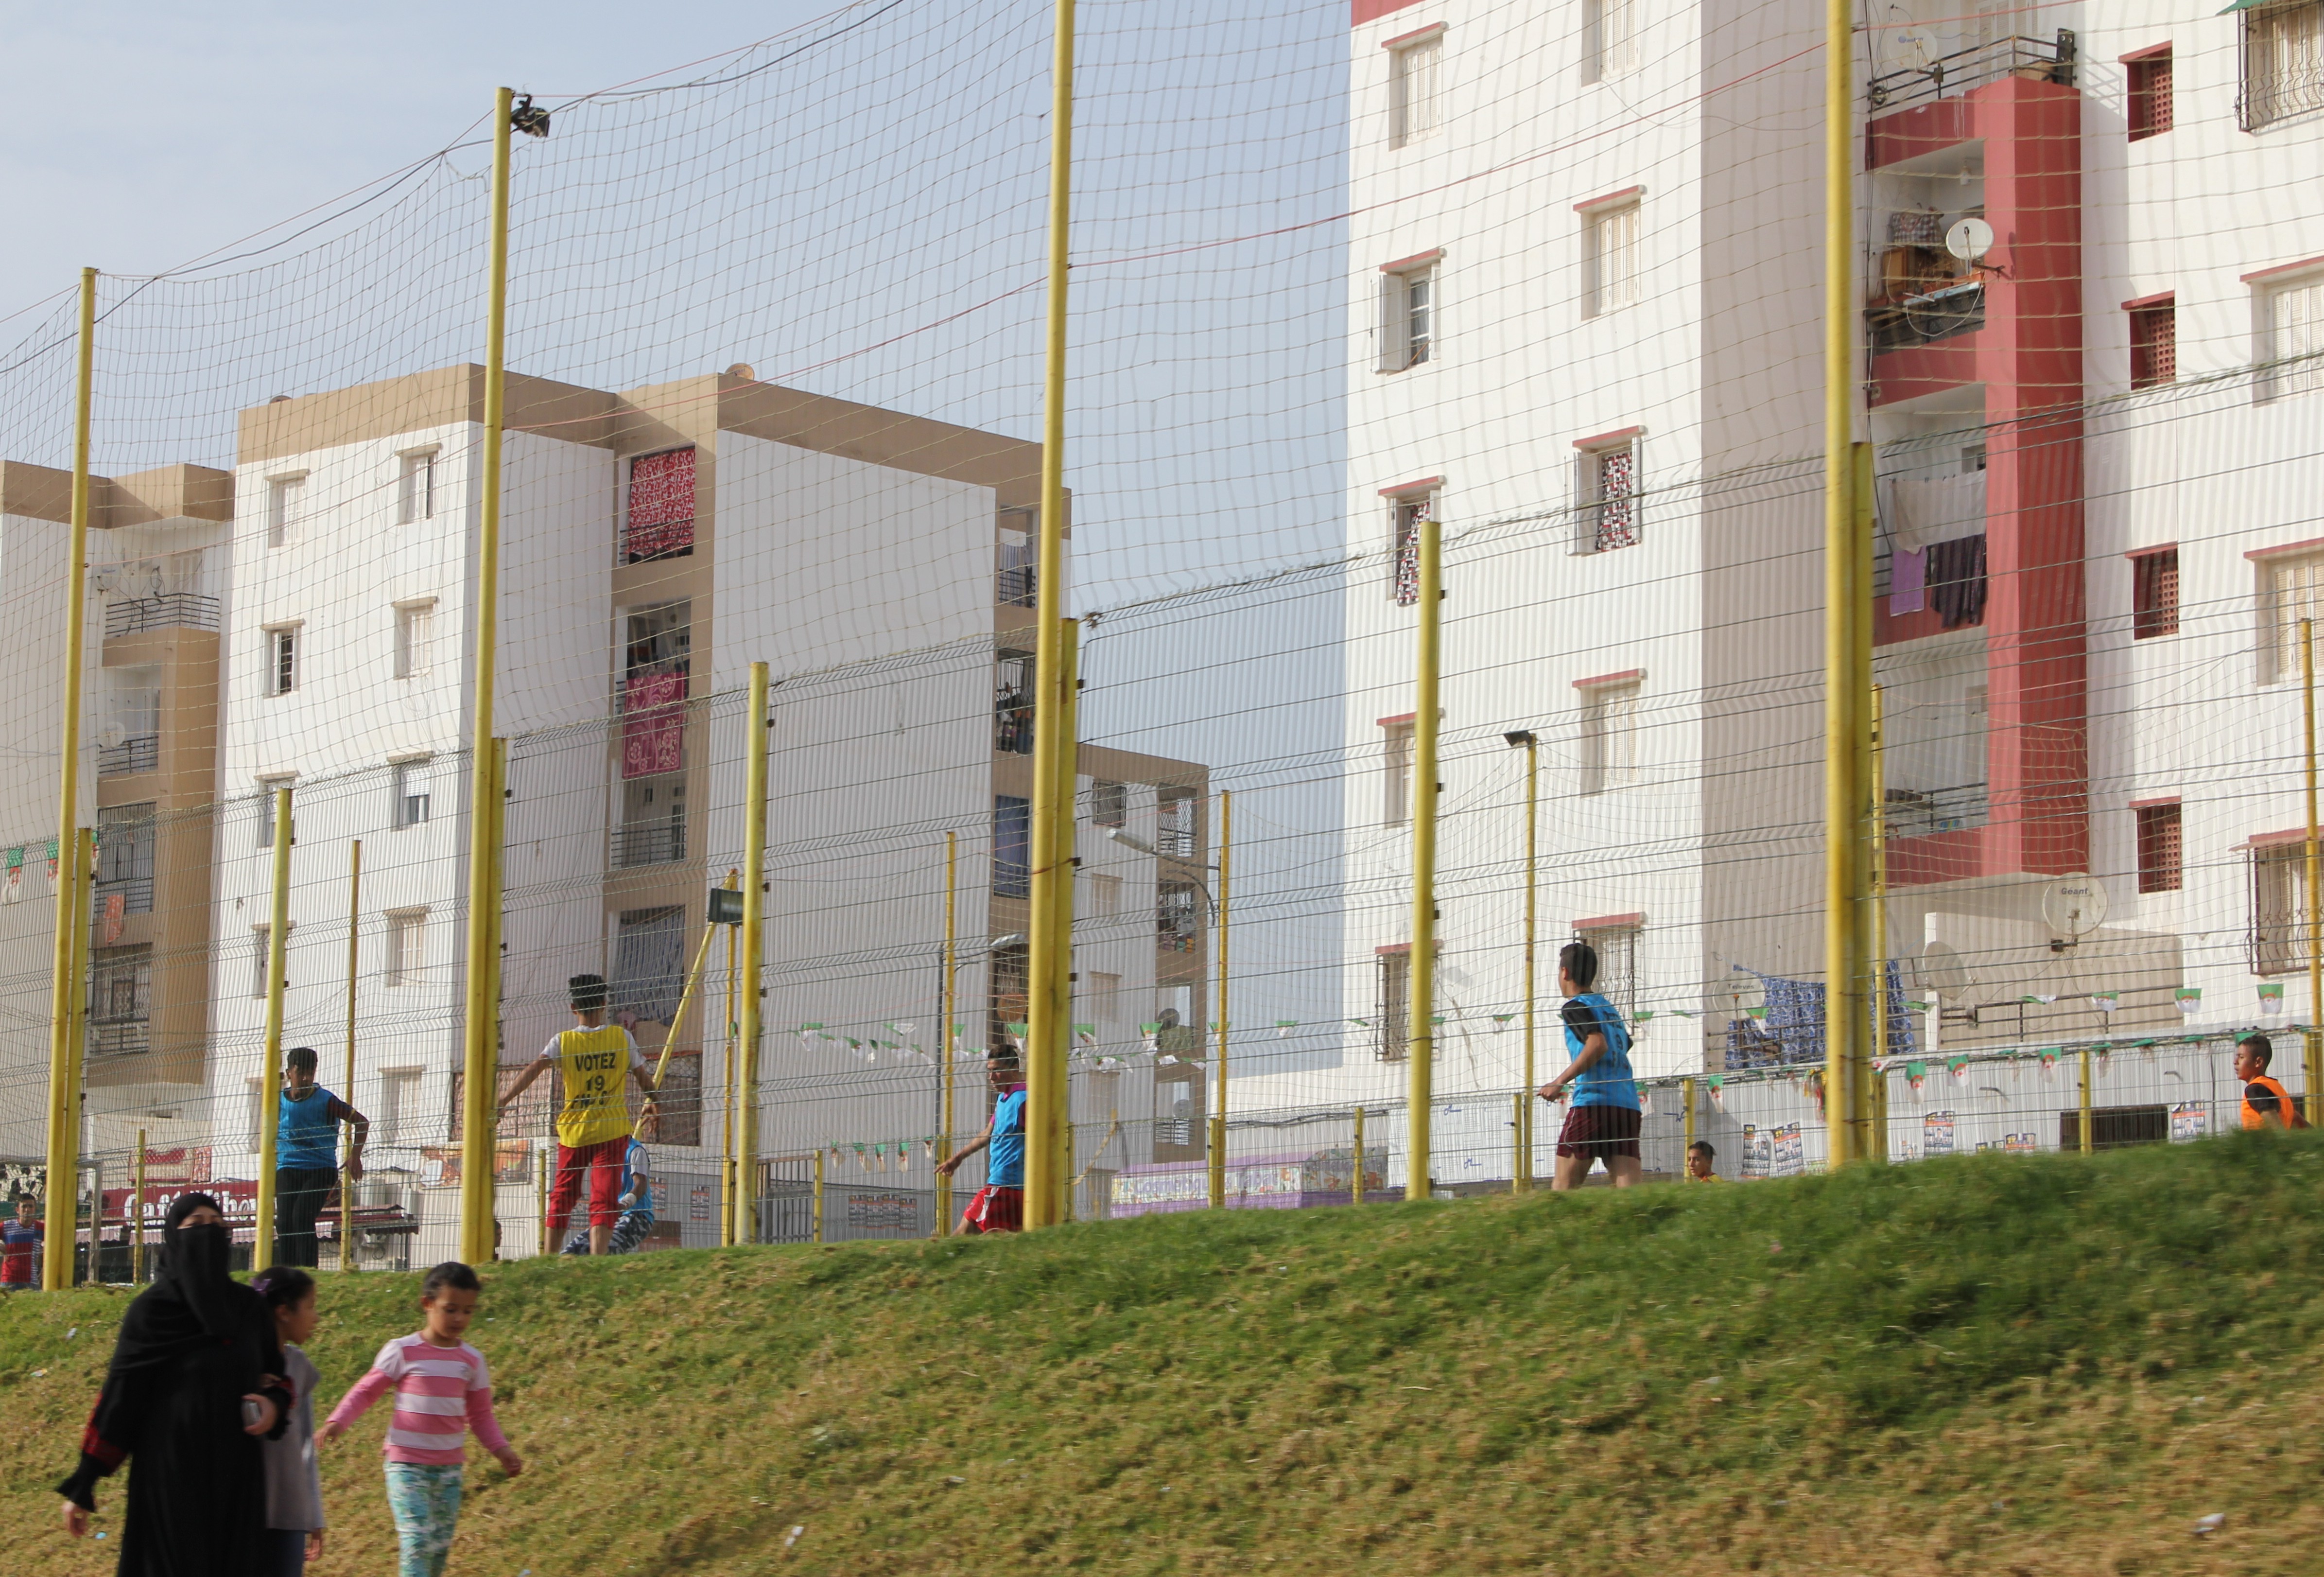 A new residential district on the outskirts of Oran, Algeria (photo: Sofian Philip Naceur)